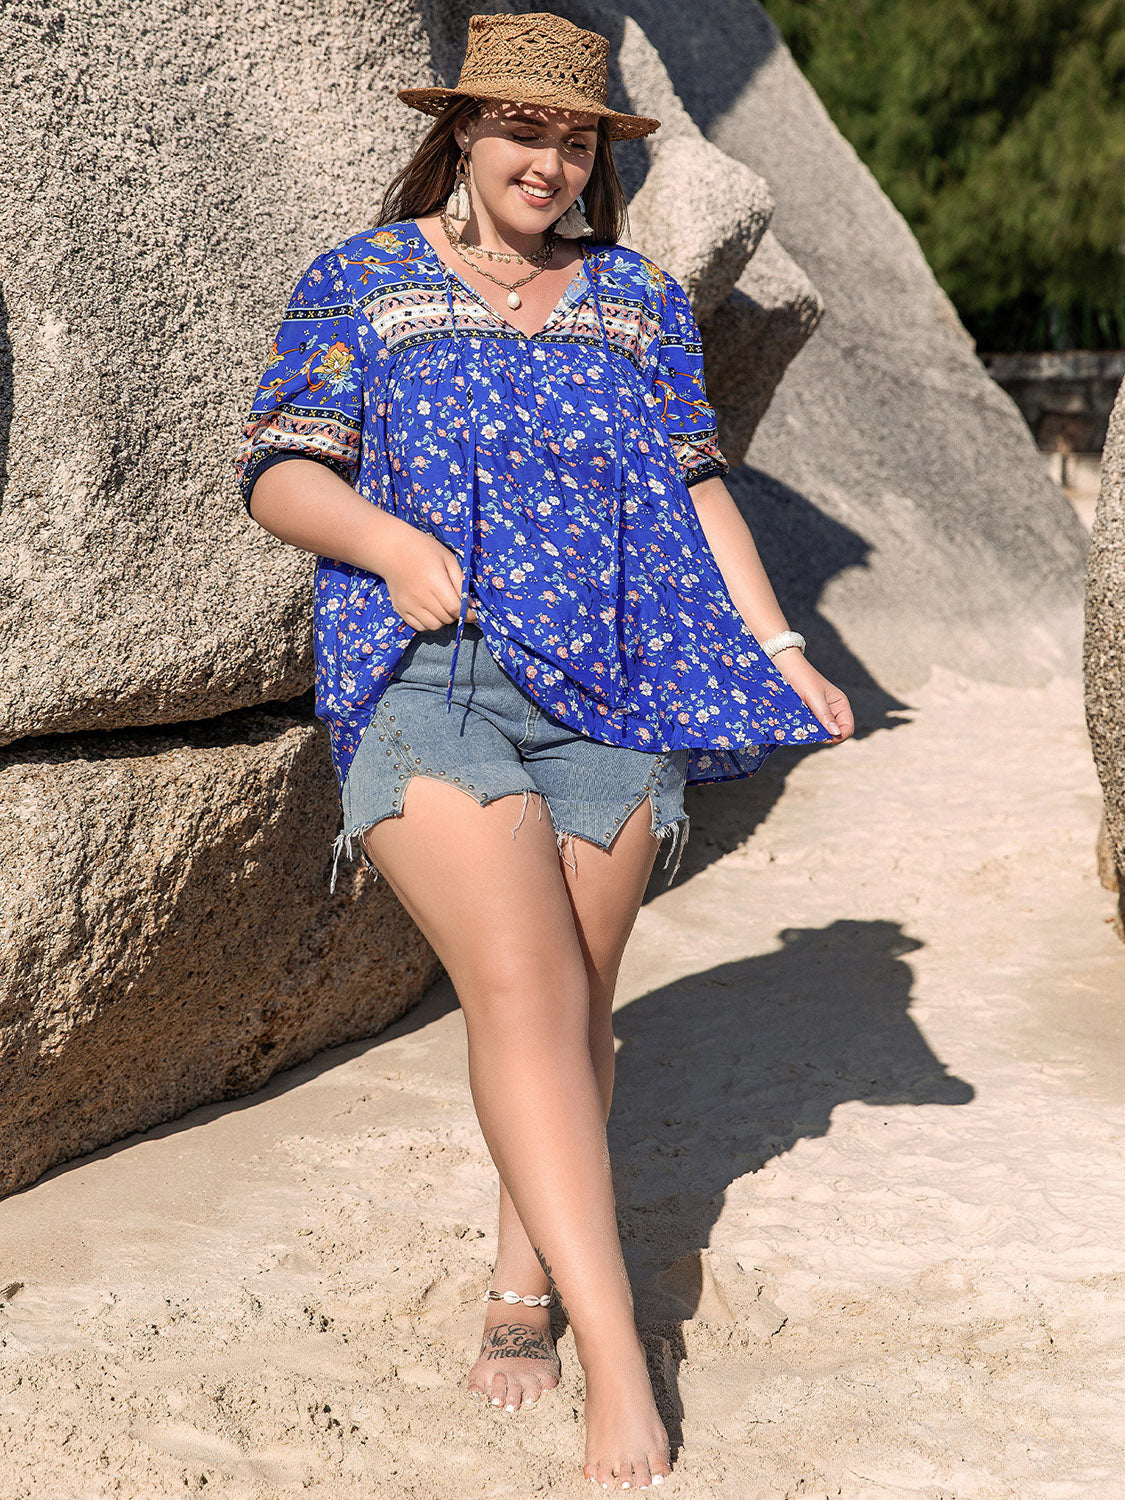 Lightweight blue blouse with whimsical floral design